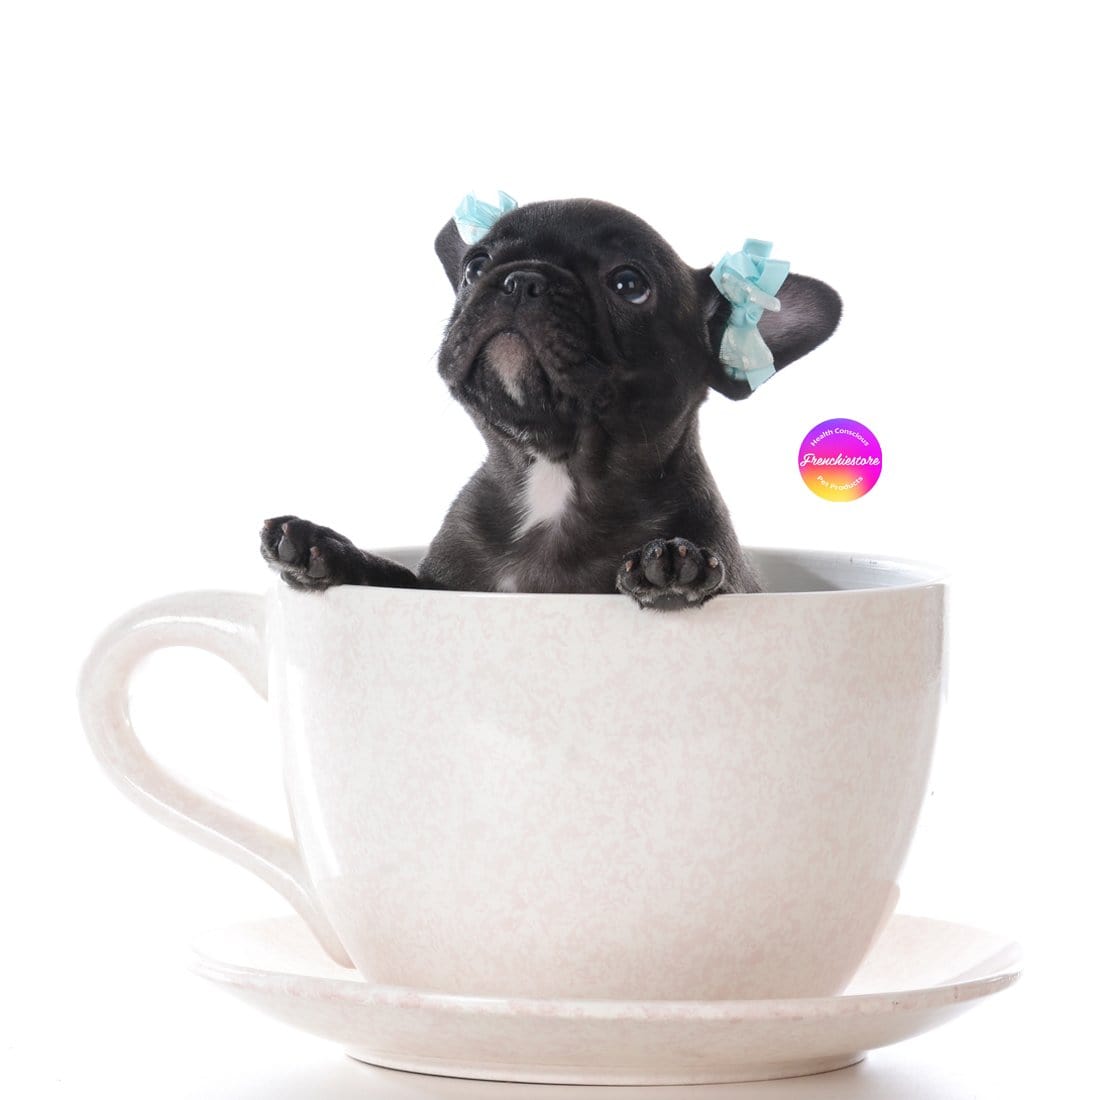 Mini / micro / teacup French Bulldog of rare colors tri lilac with tan points. Frenchie sitting in a tea cup mug